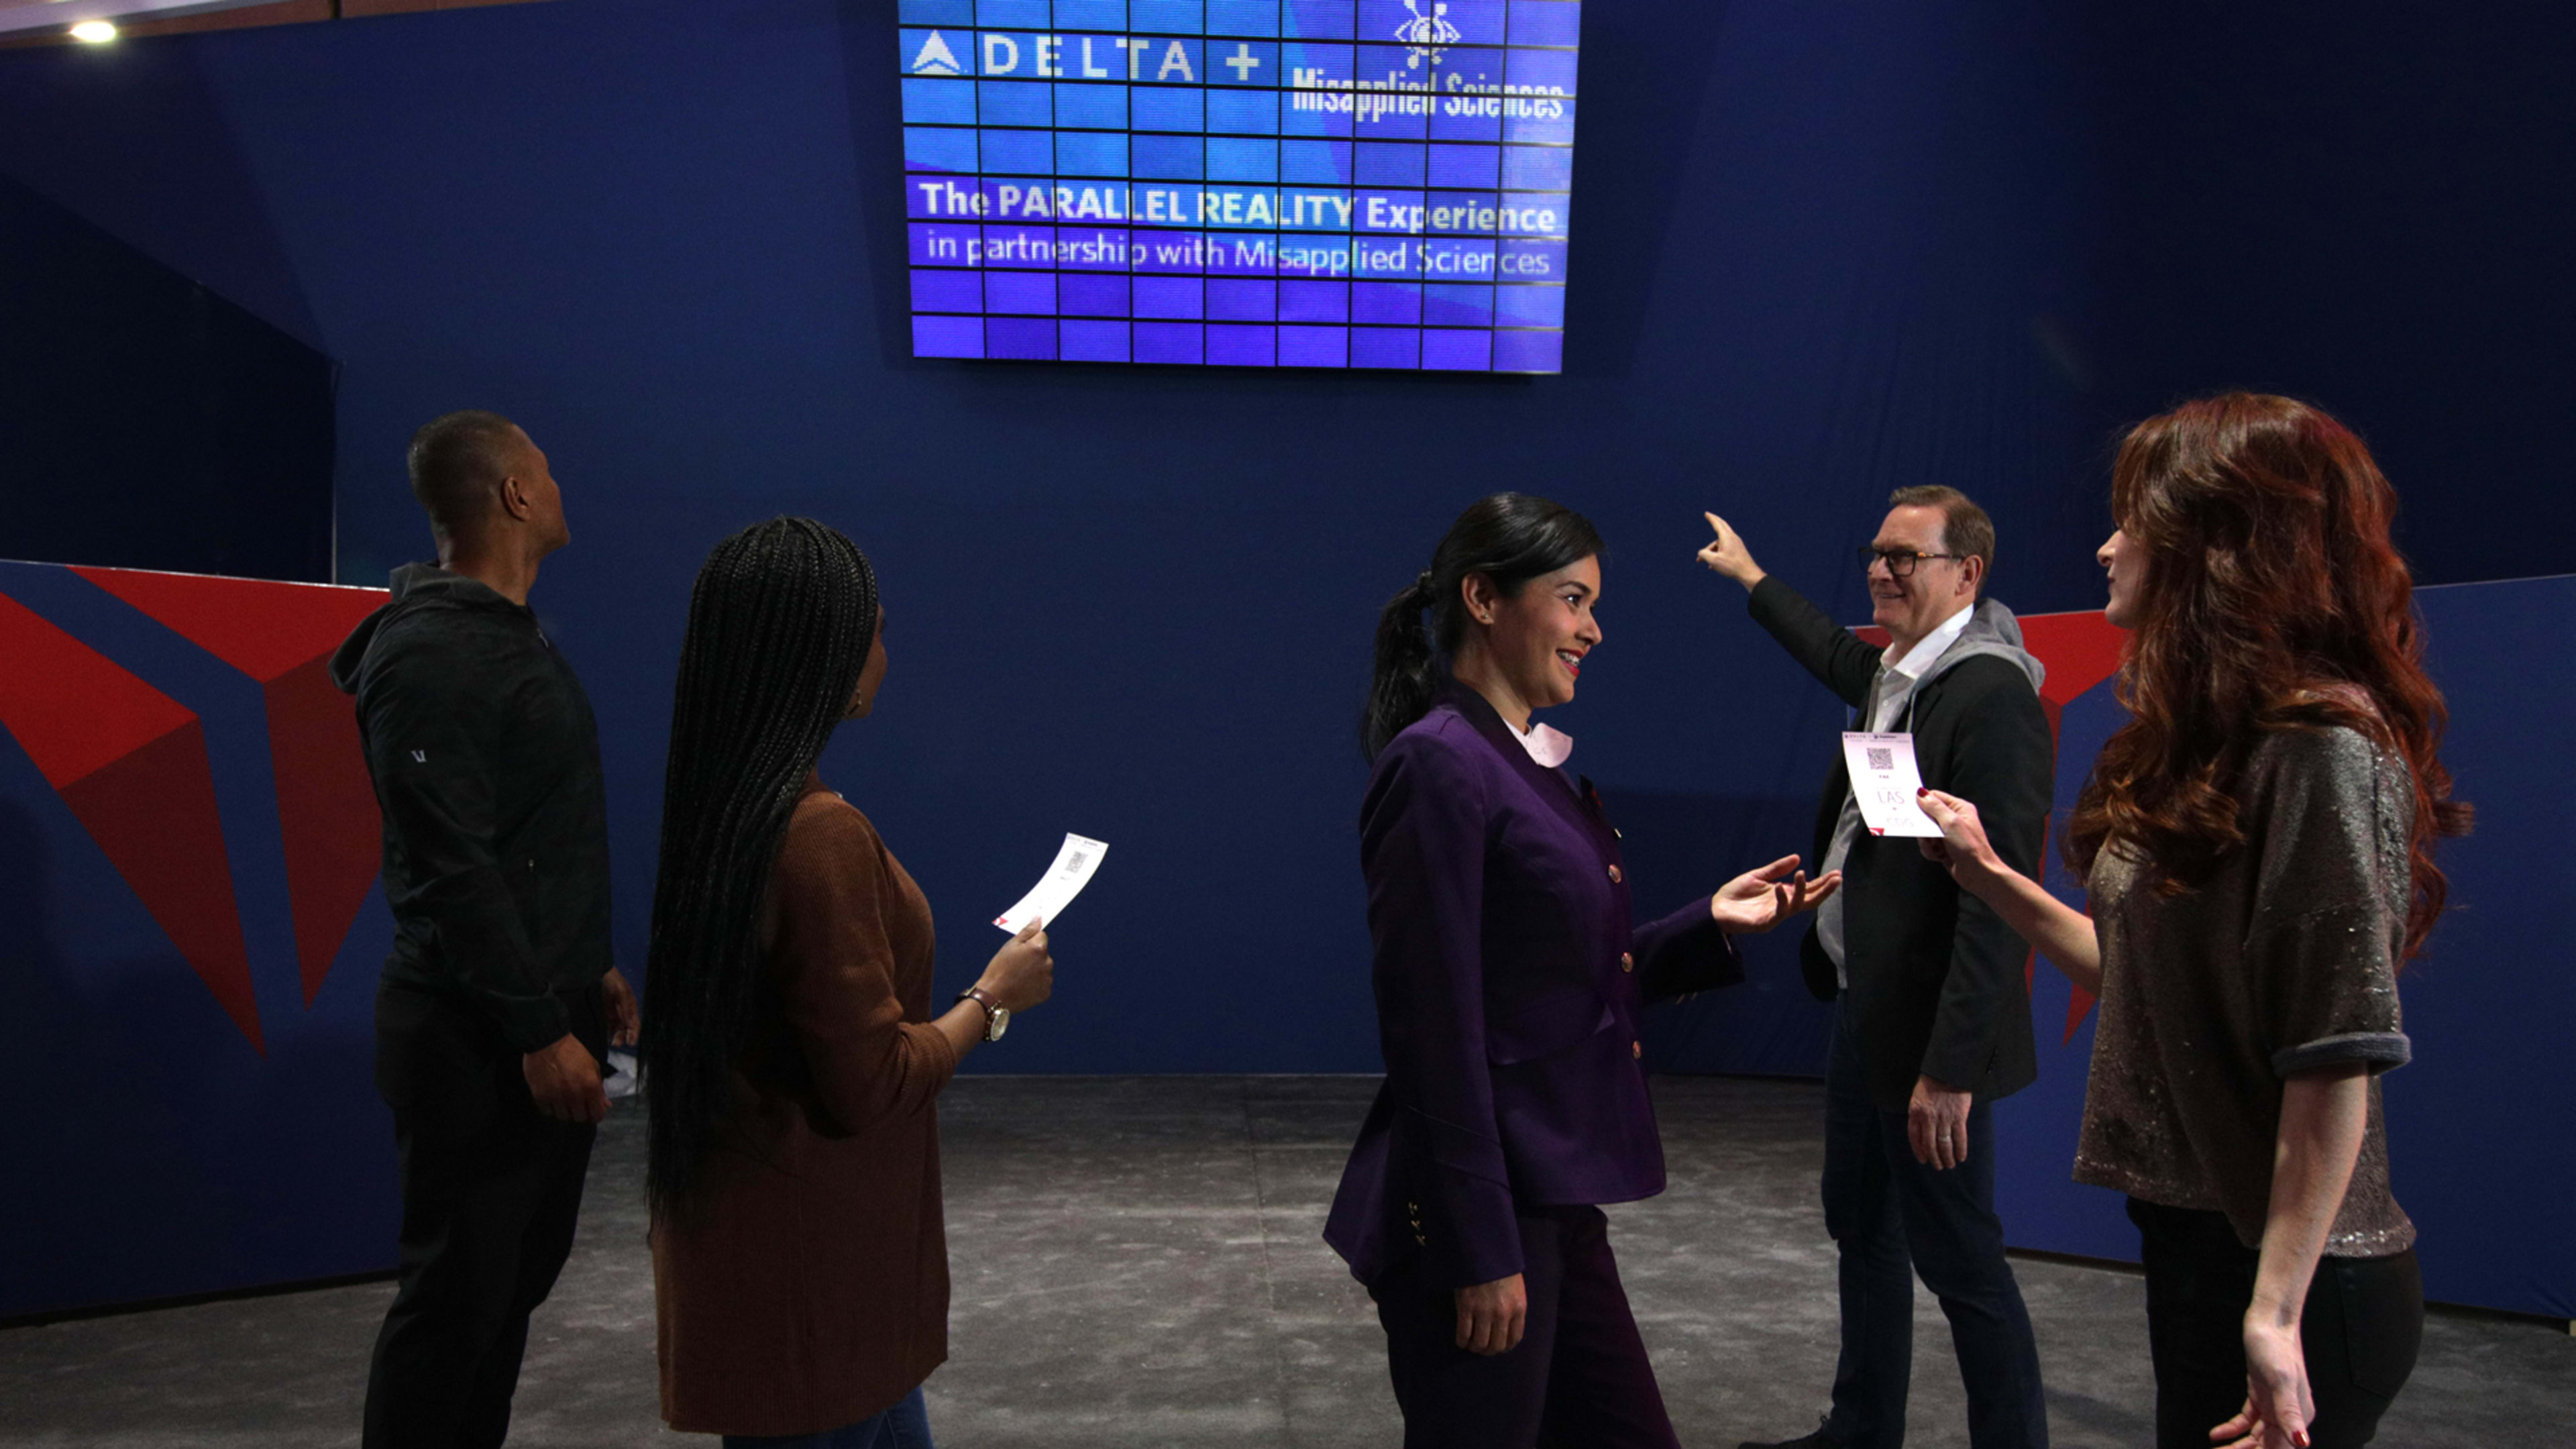 Delta’s ‘parallel reality’ display sounds like sci-fi, but it’s coming soon